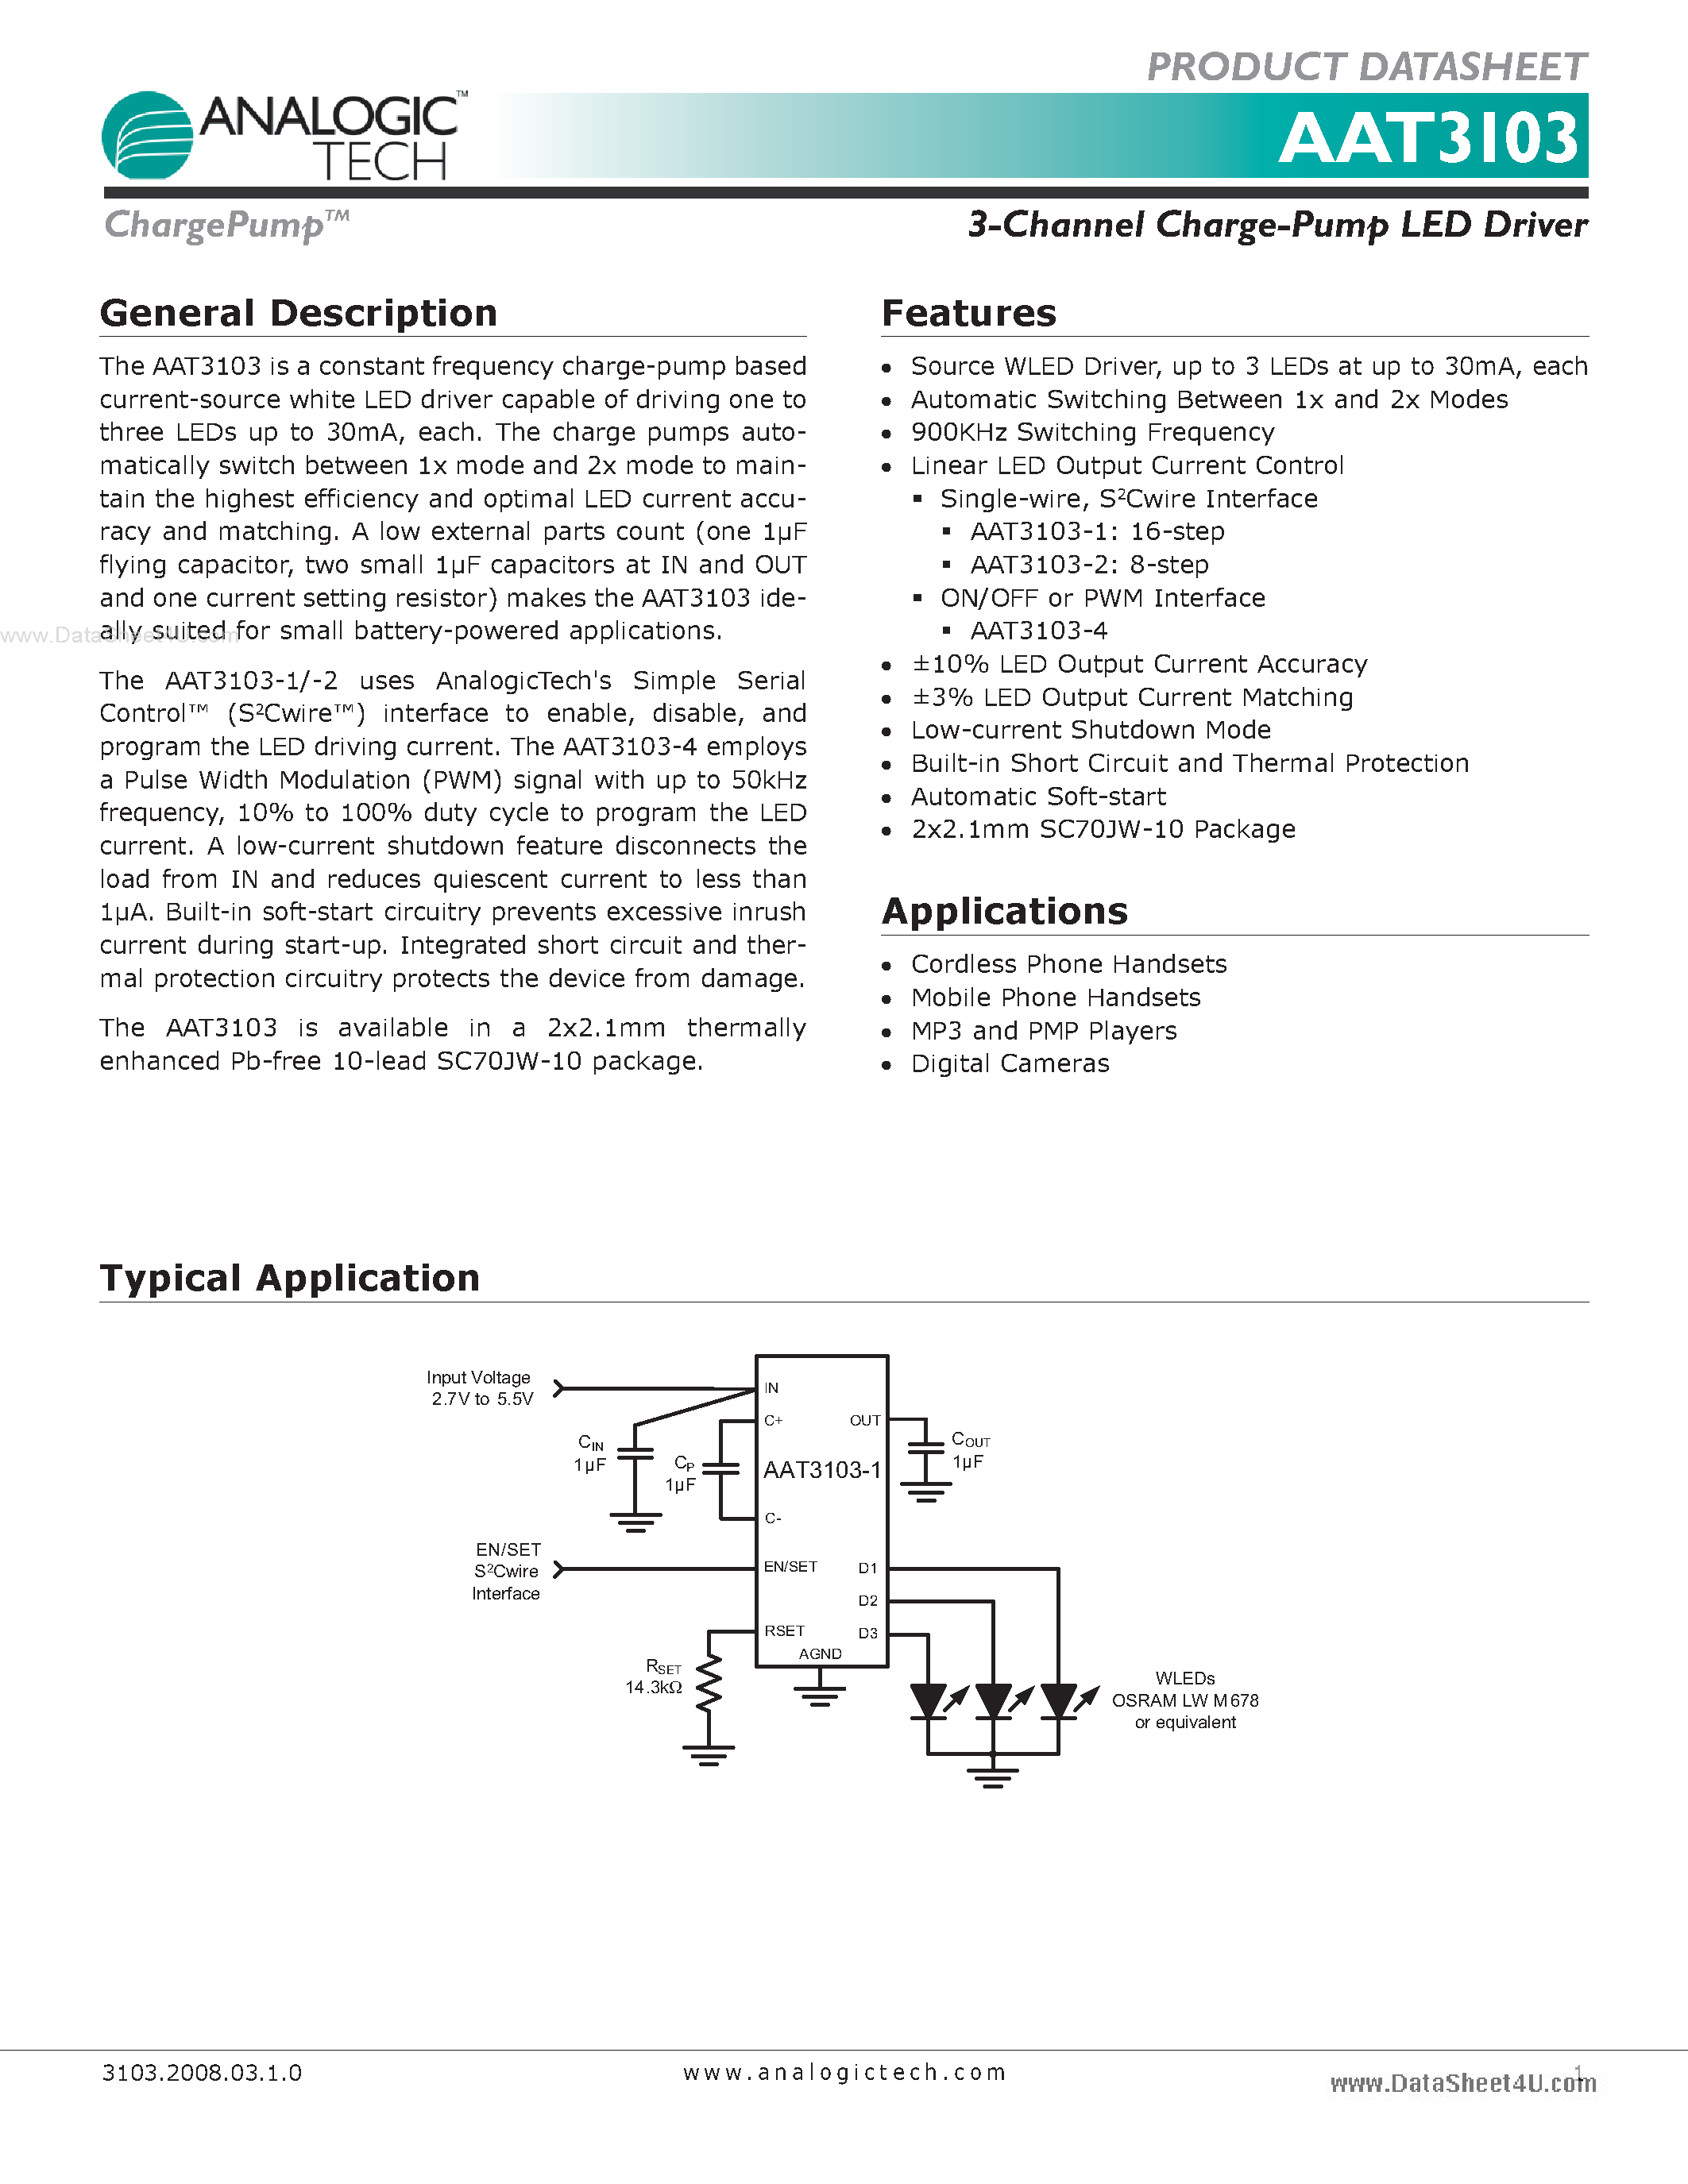 Datasheet AAT3103 - 3-Channel Charge-Pump LED Driver page 1